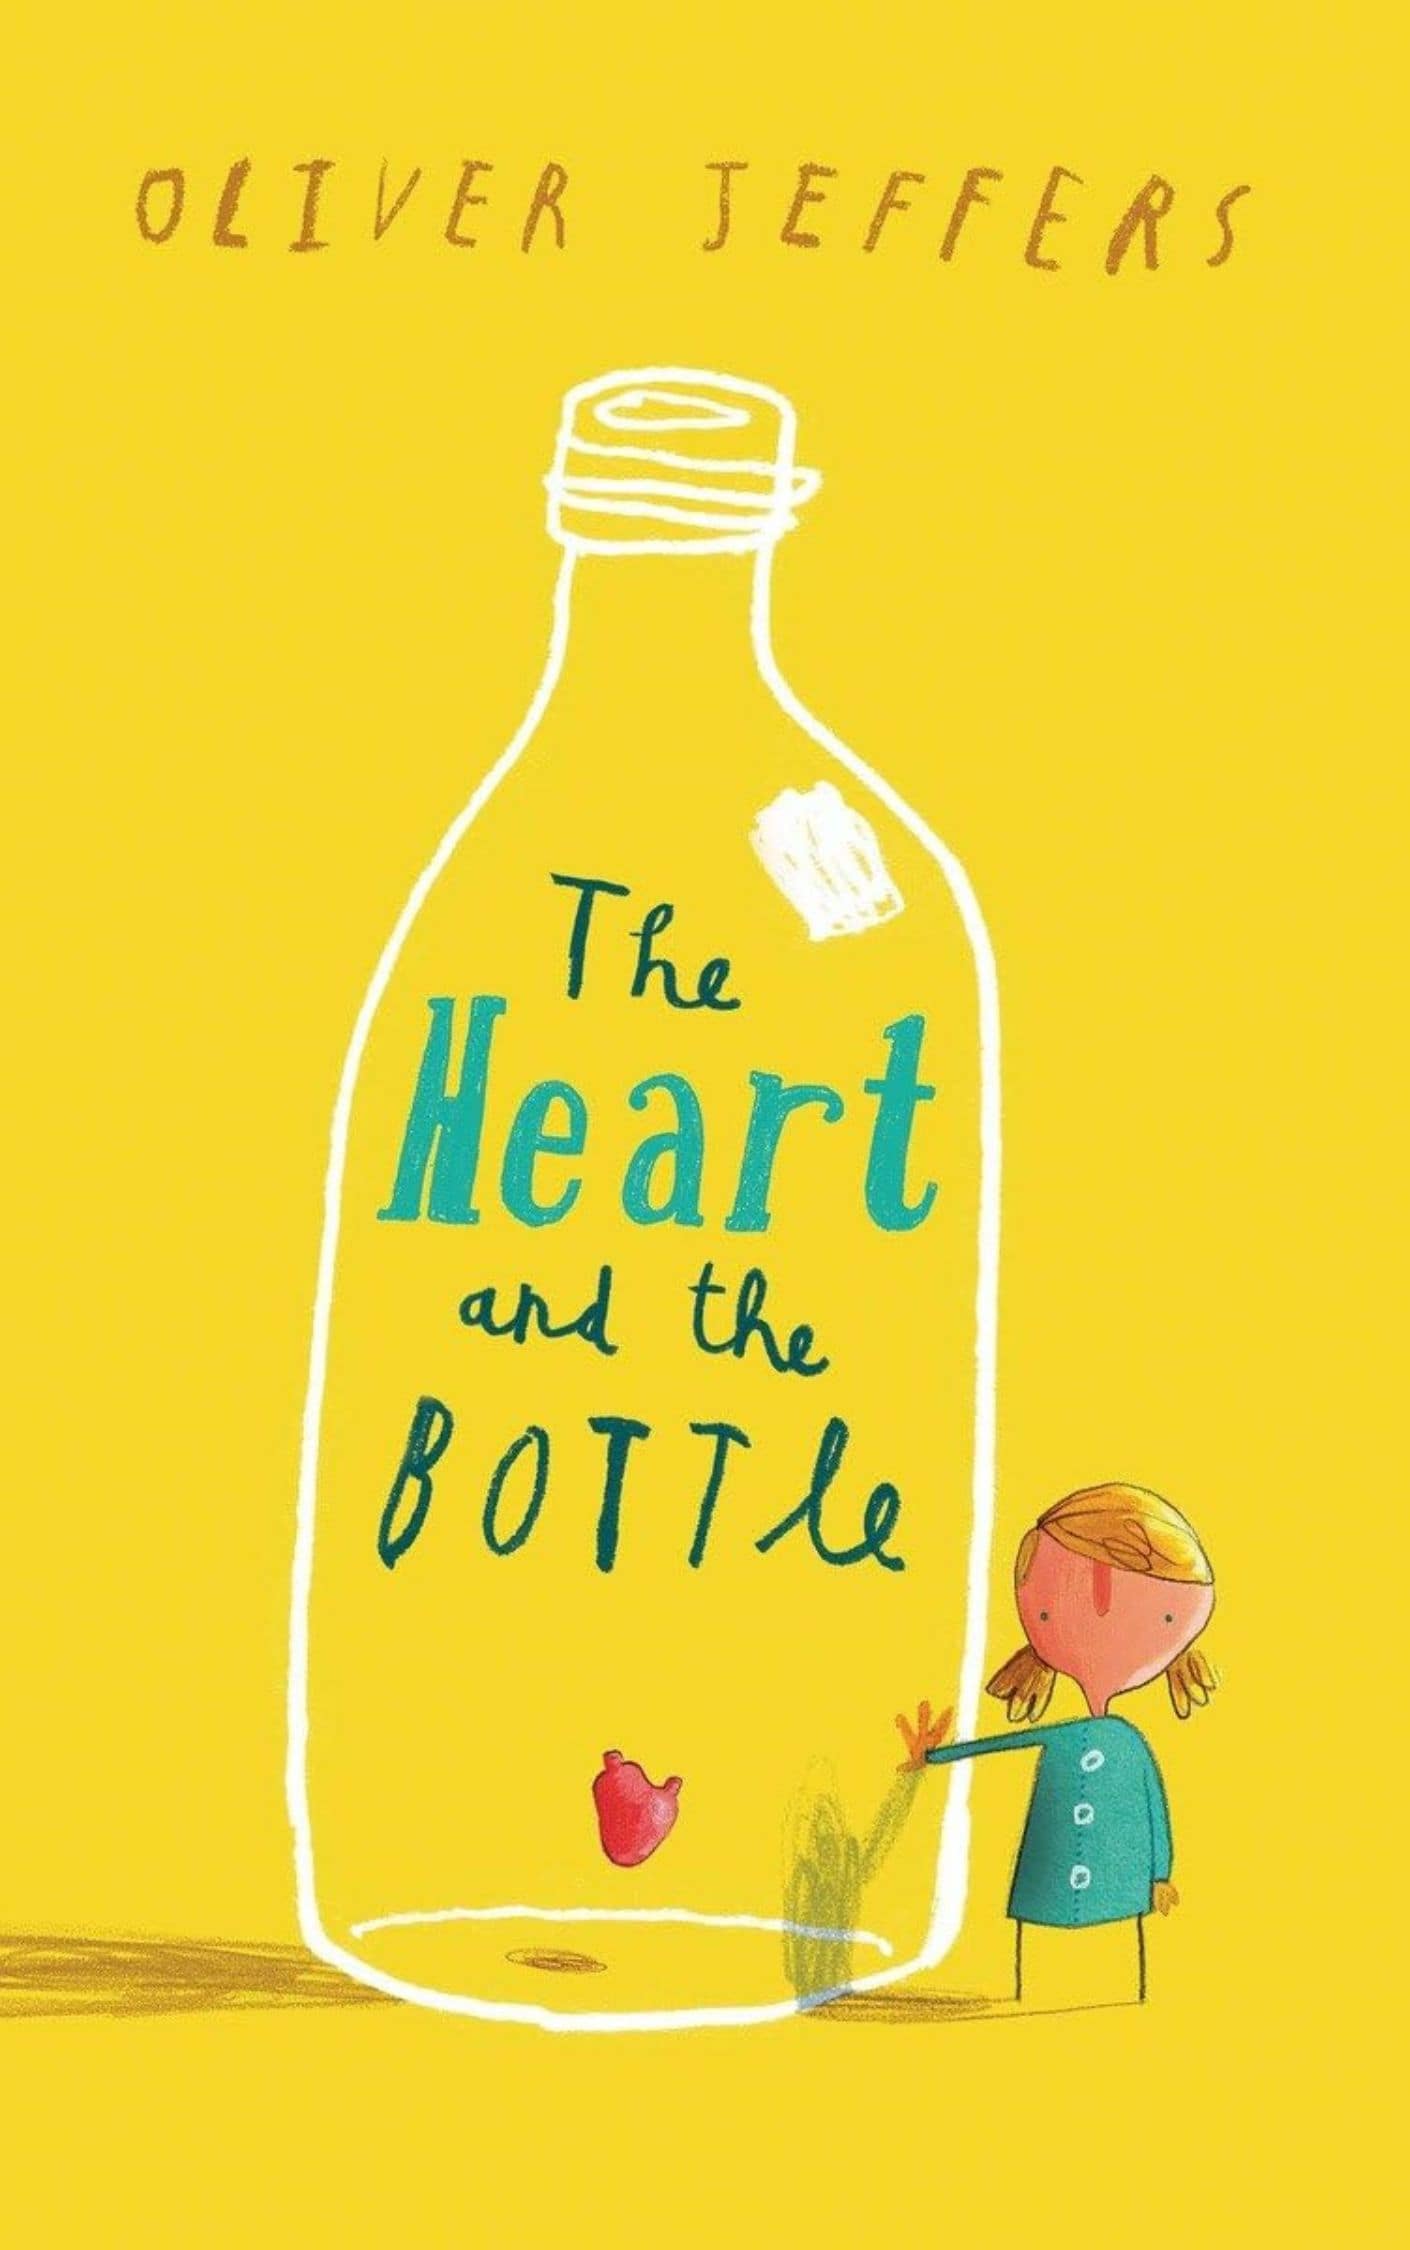 The Heart and the Bottles